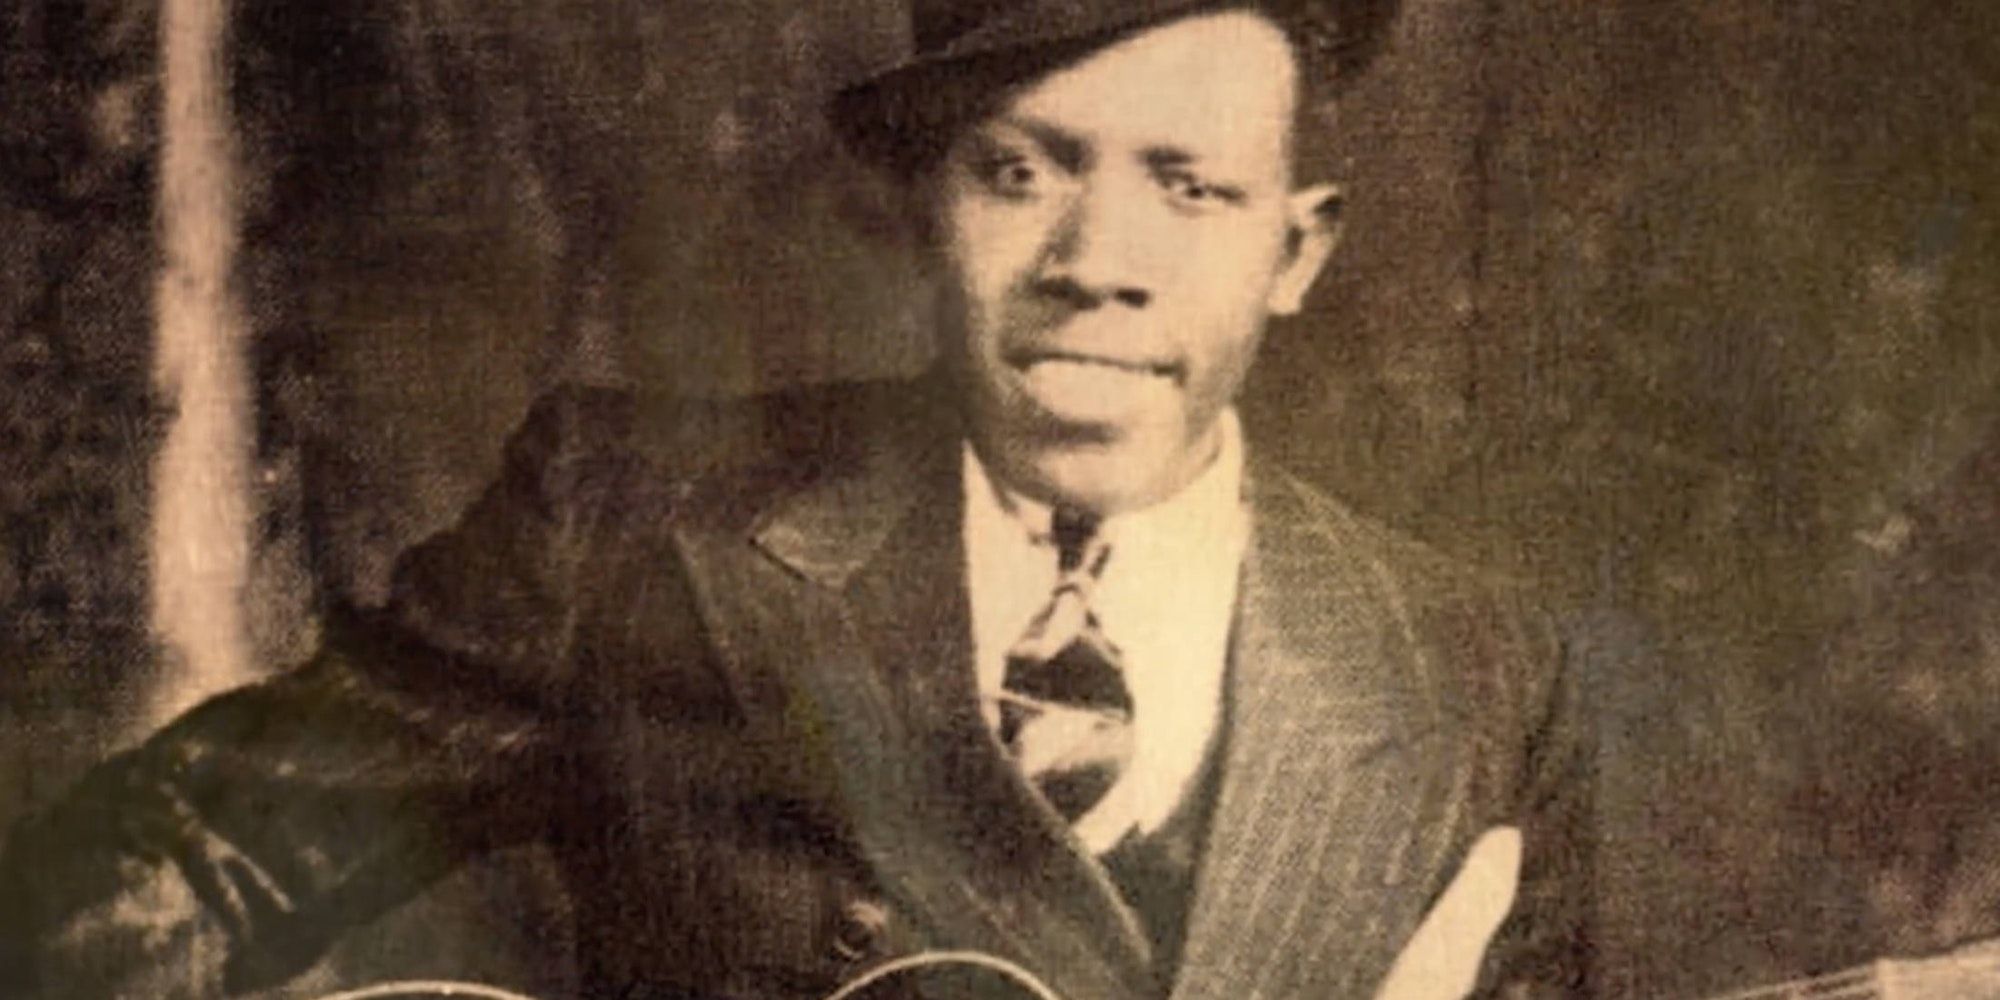 An image of guitarist Robert Johnson used in the Netflix documentary Devil at the Crossroads.